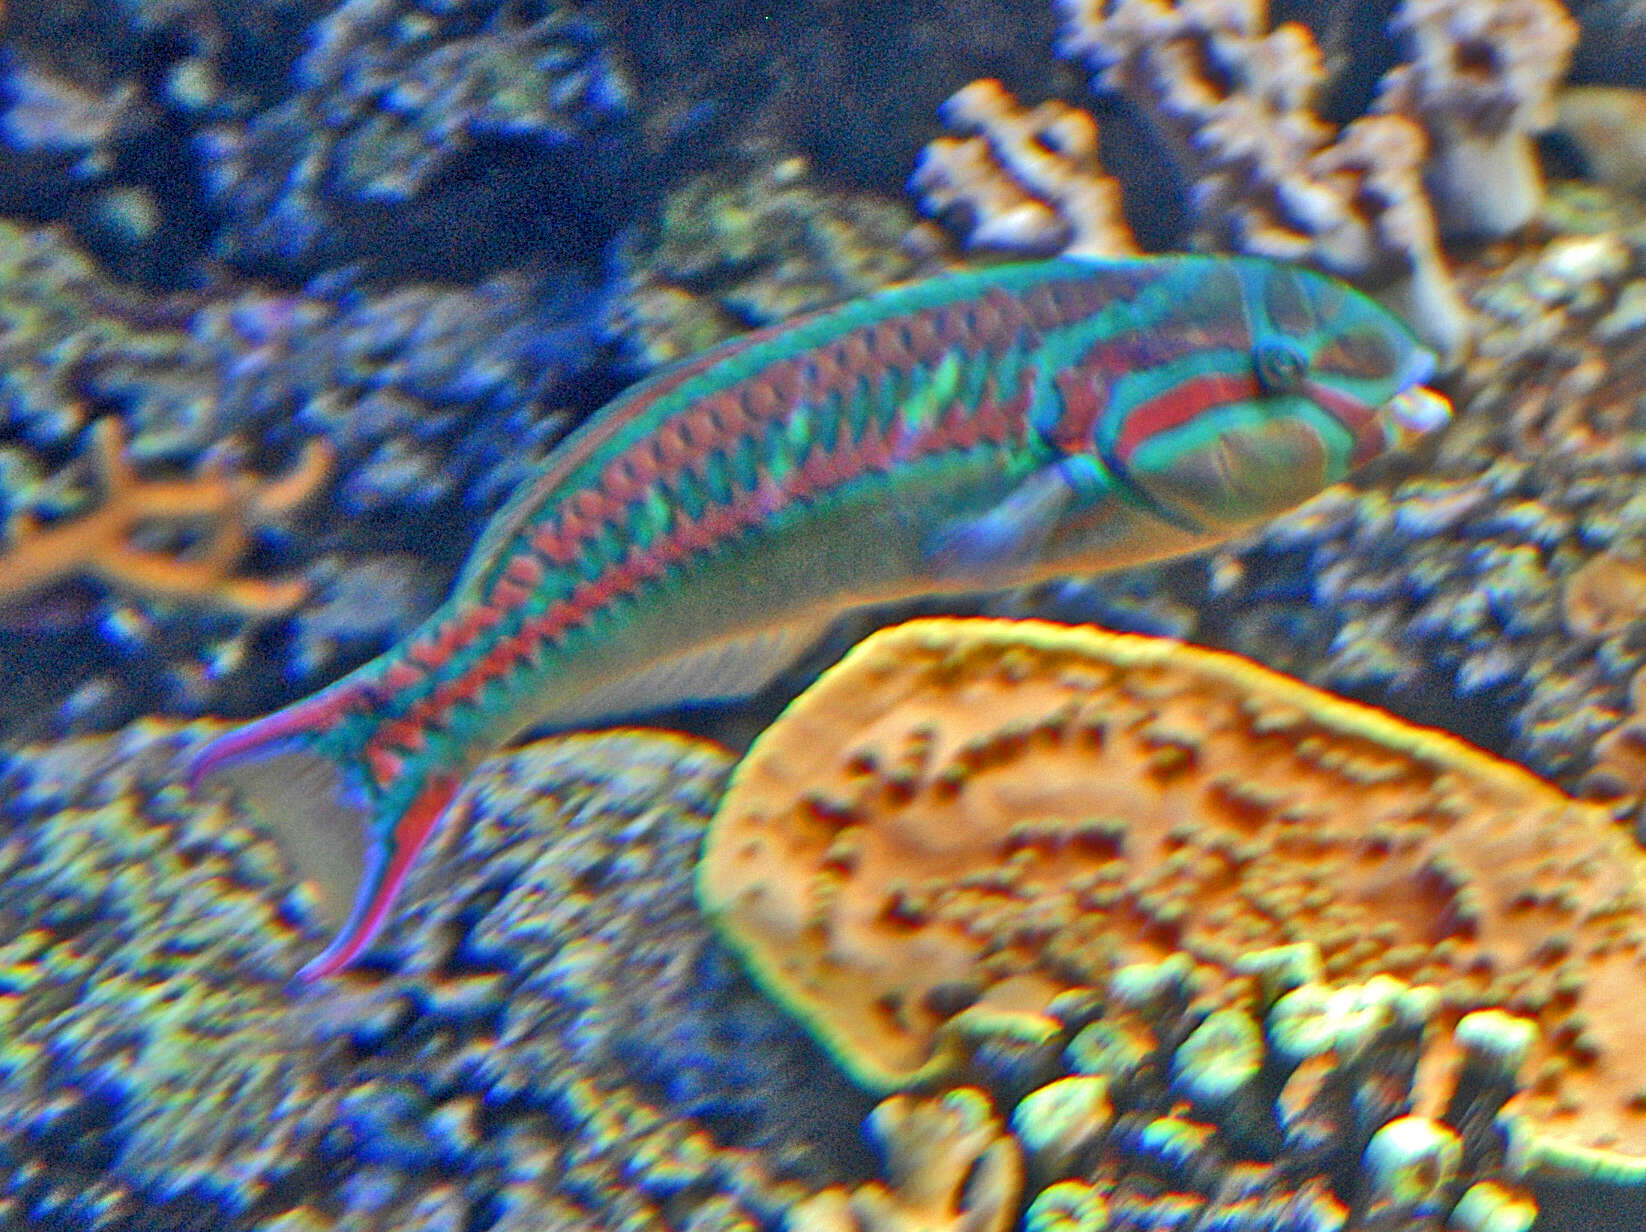 Image of Five striped surge wrasse